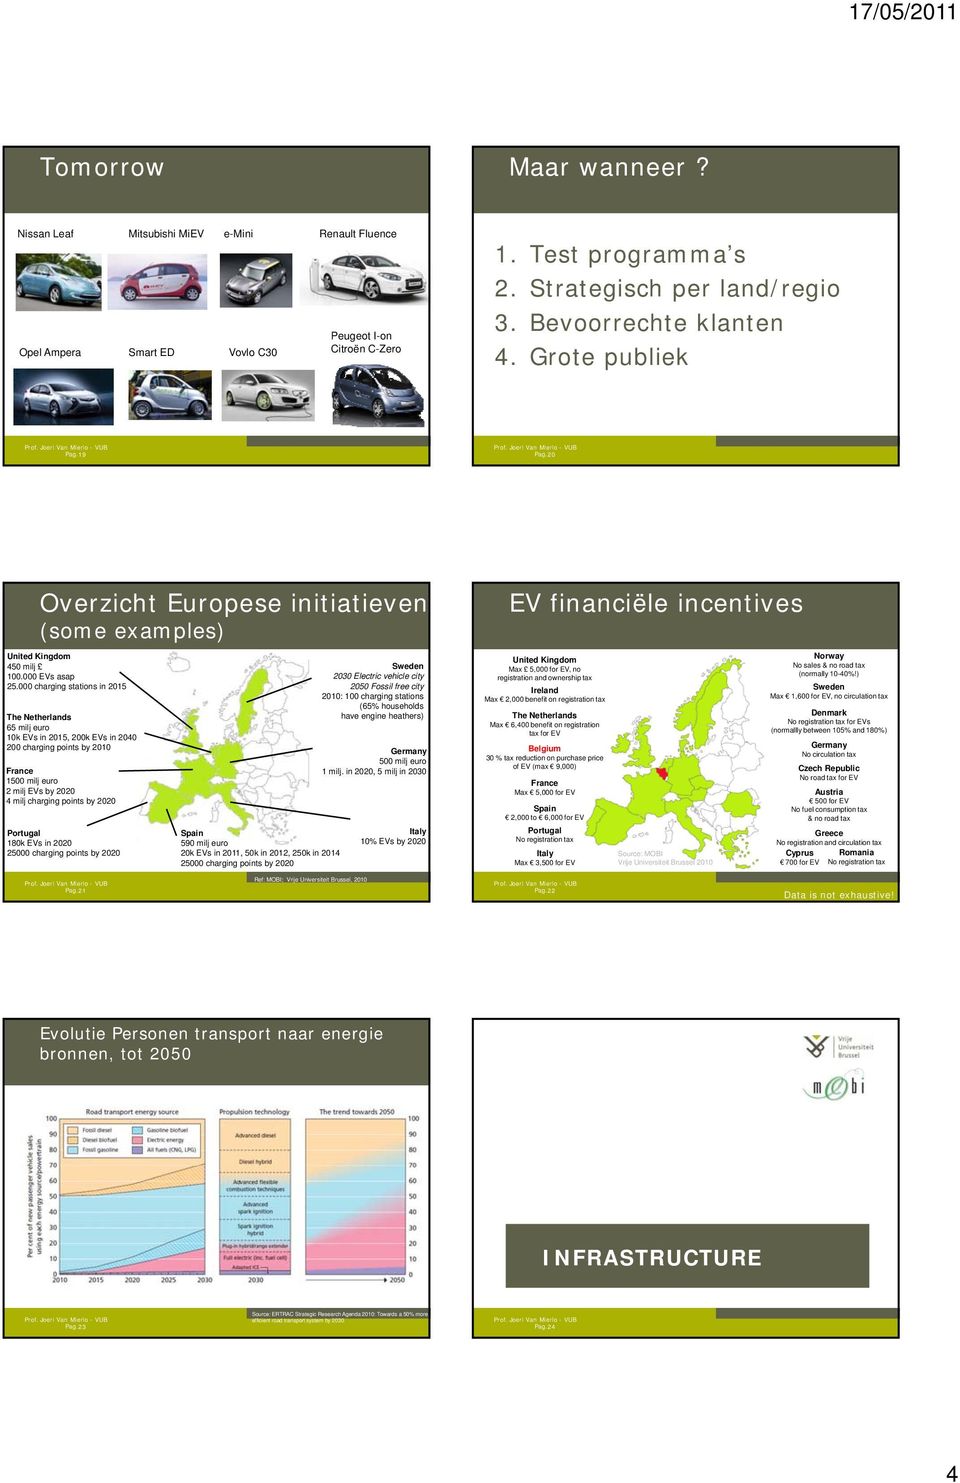 000 charging stations in 2015 The Netherlands 65 milj euro 10k EVs in 2015, 200k EVs in 2040 200 charging points by 2010 France 1500 milj euro 2 milj EVs by 2020 4 milj charging points by 2020